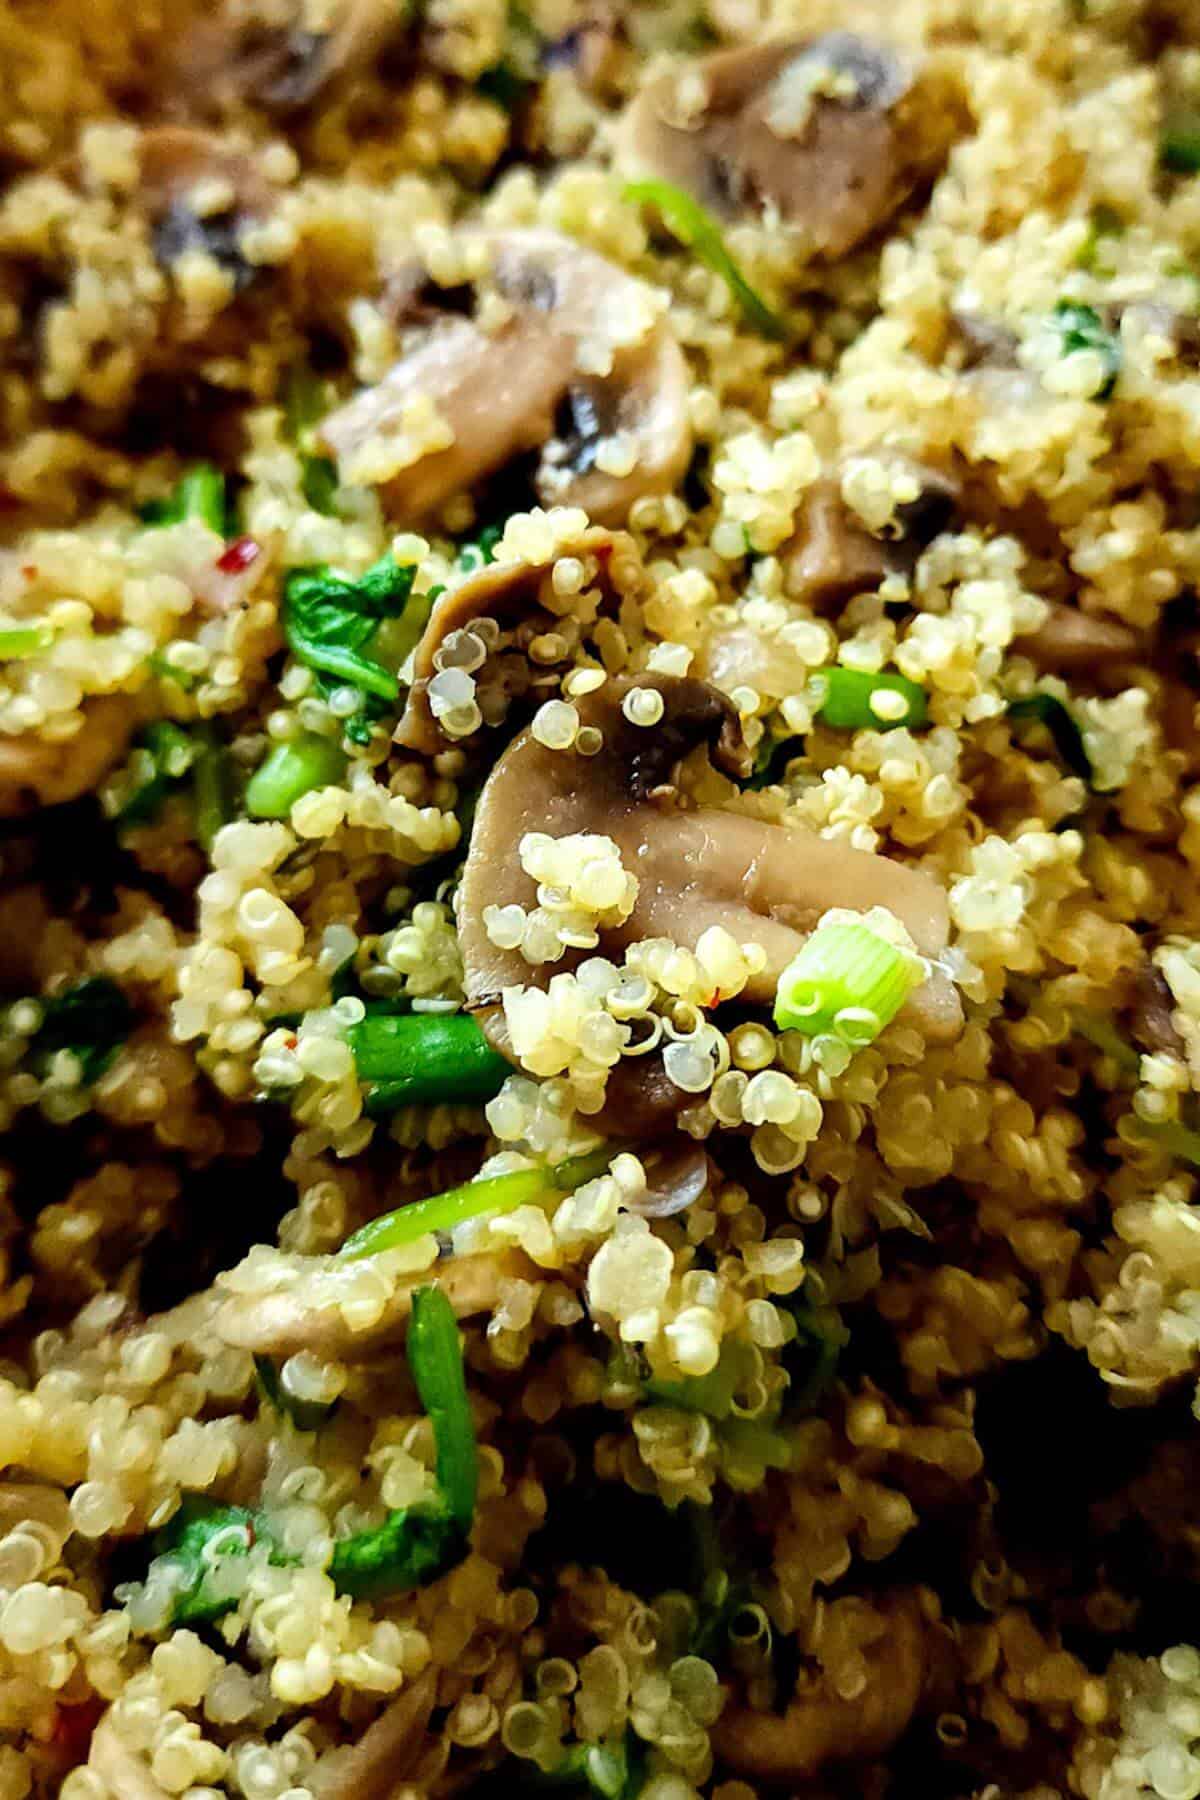 Mushroom spinach quinoa garnished with chopped green onions.